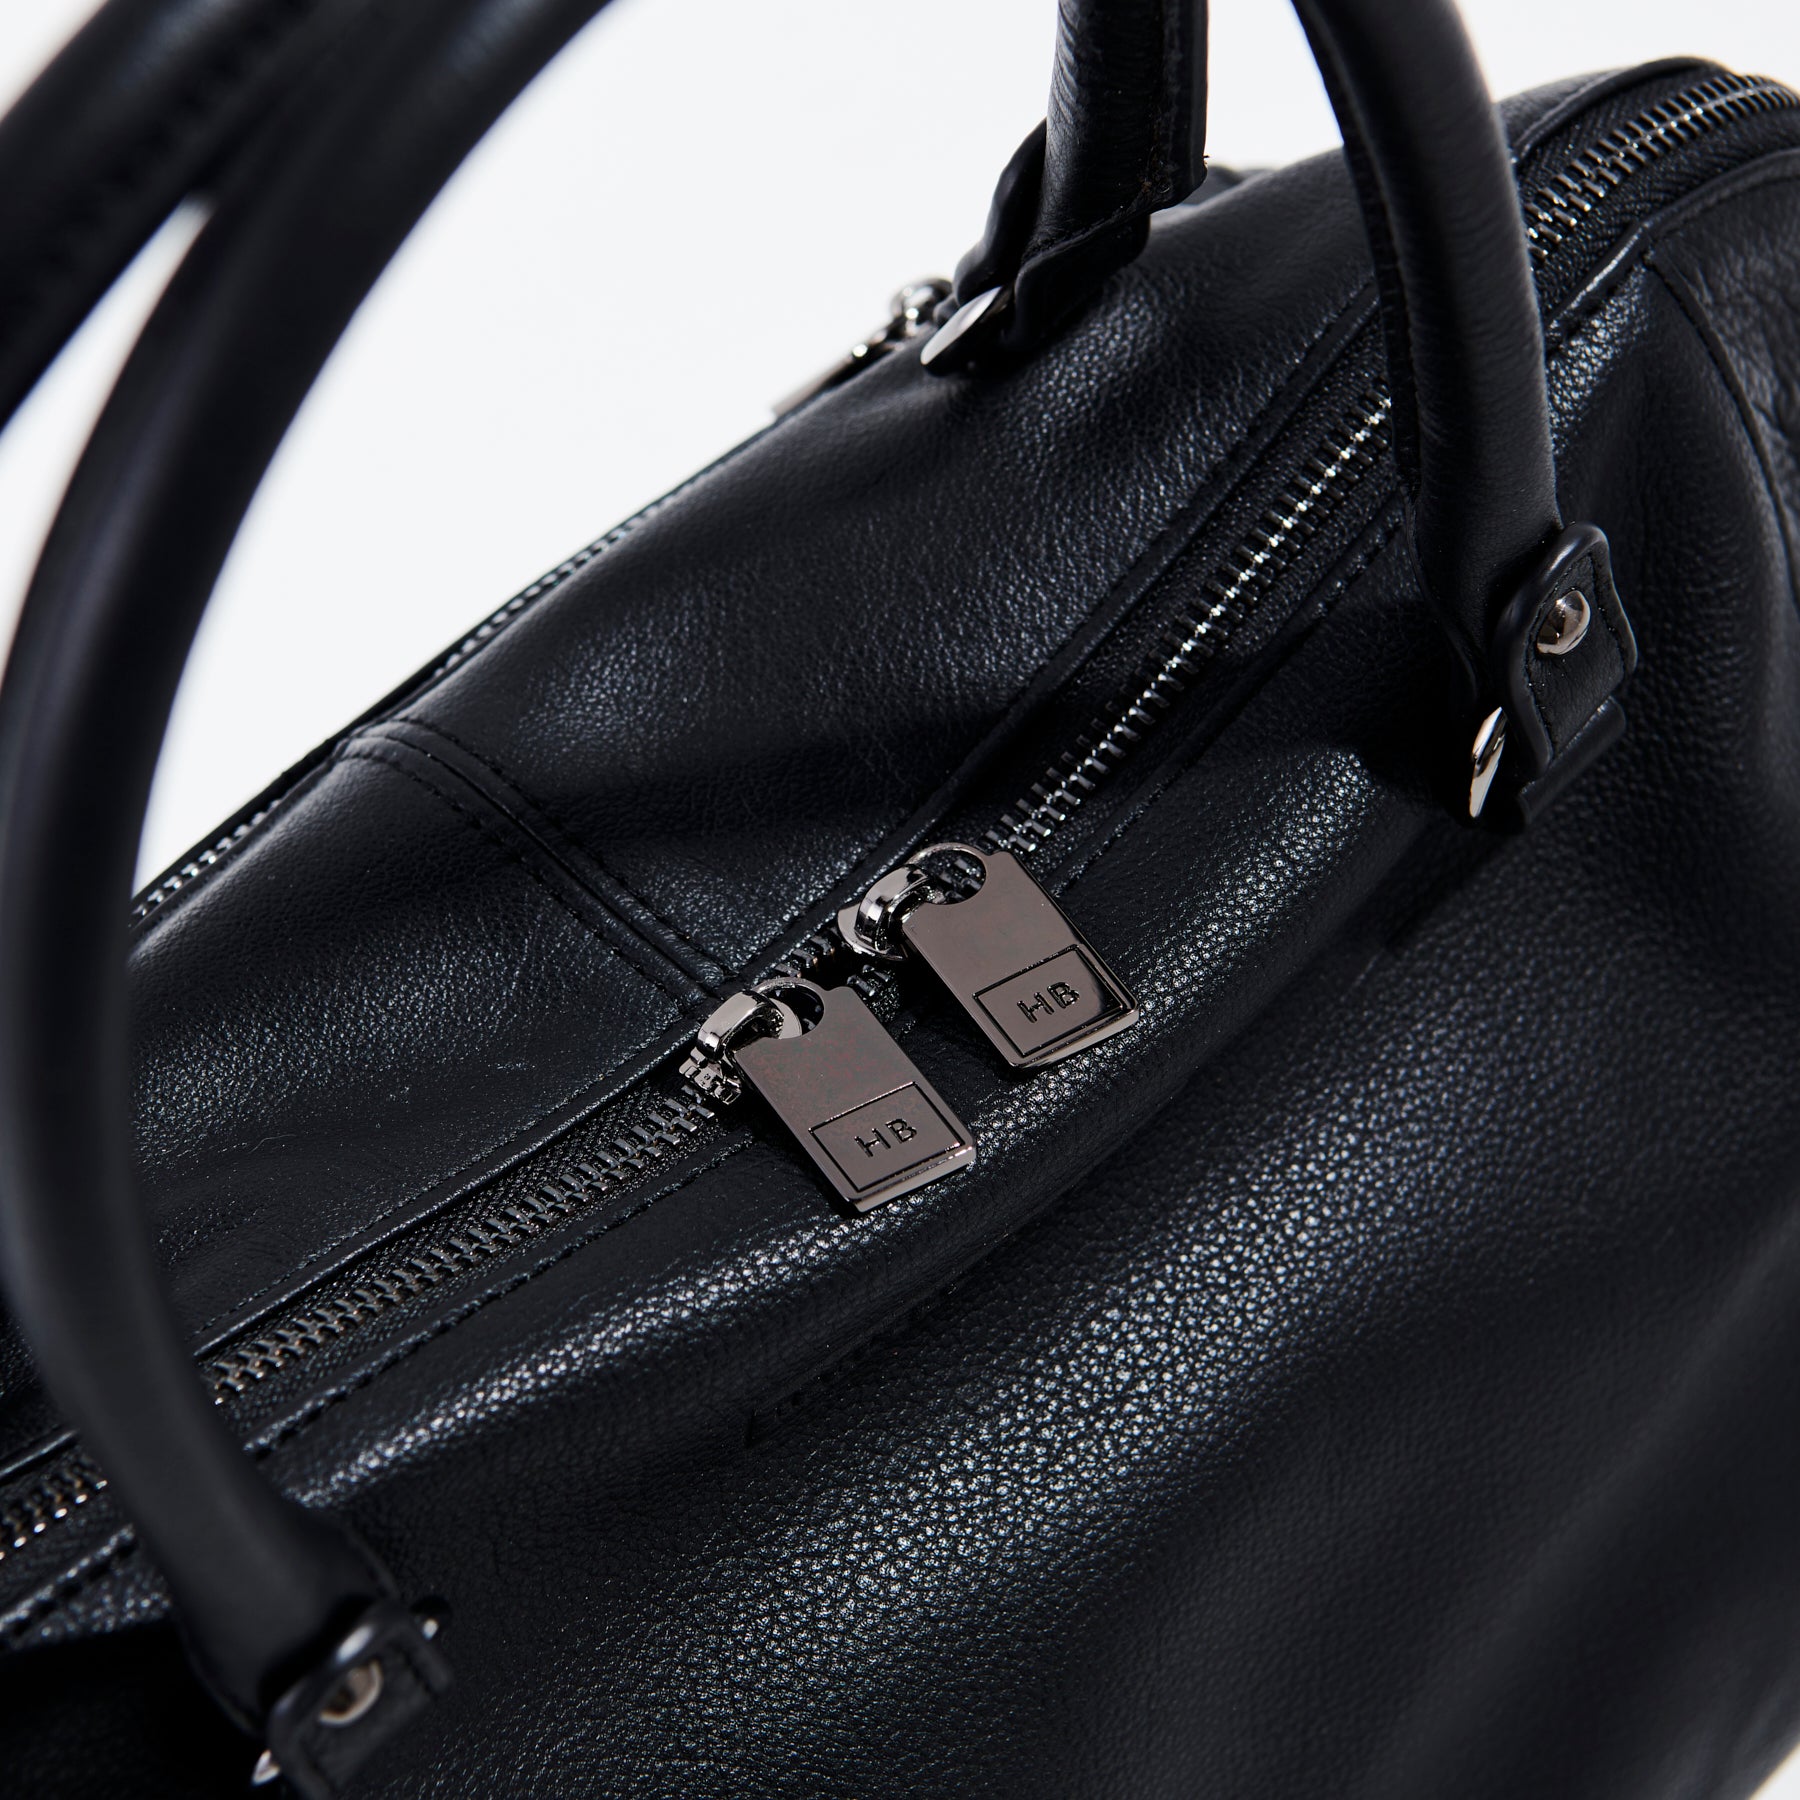 detailed view of double zip of black leather handbag